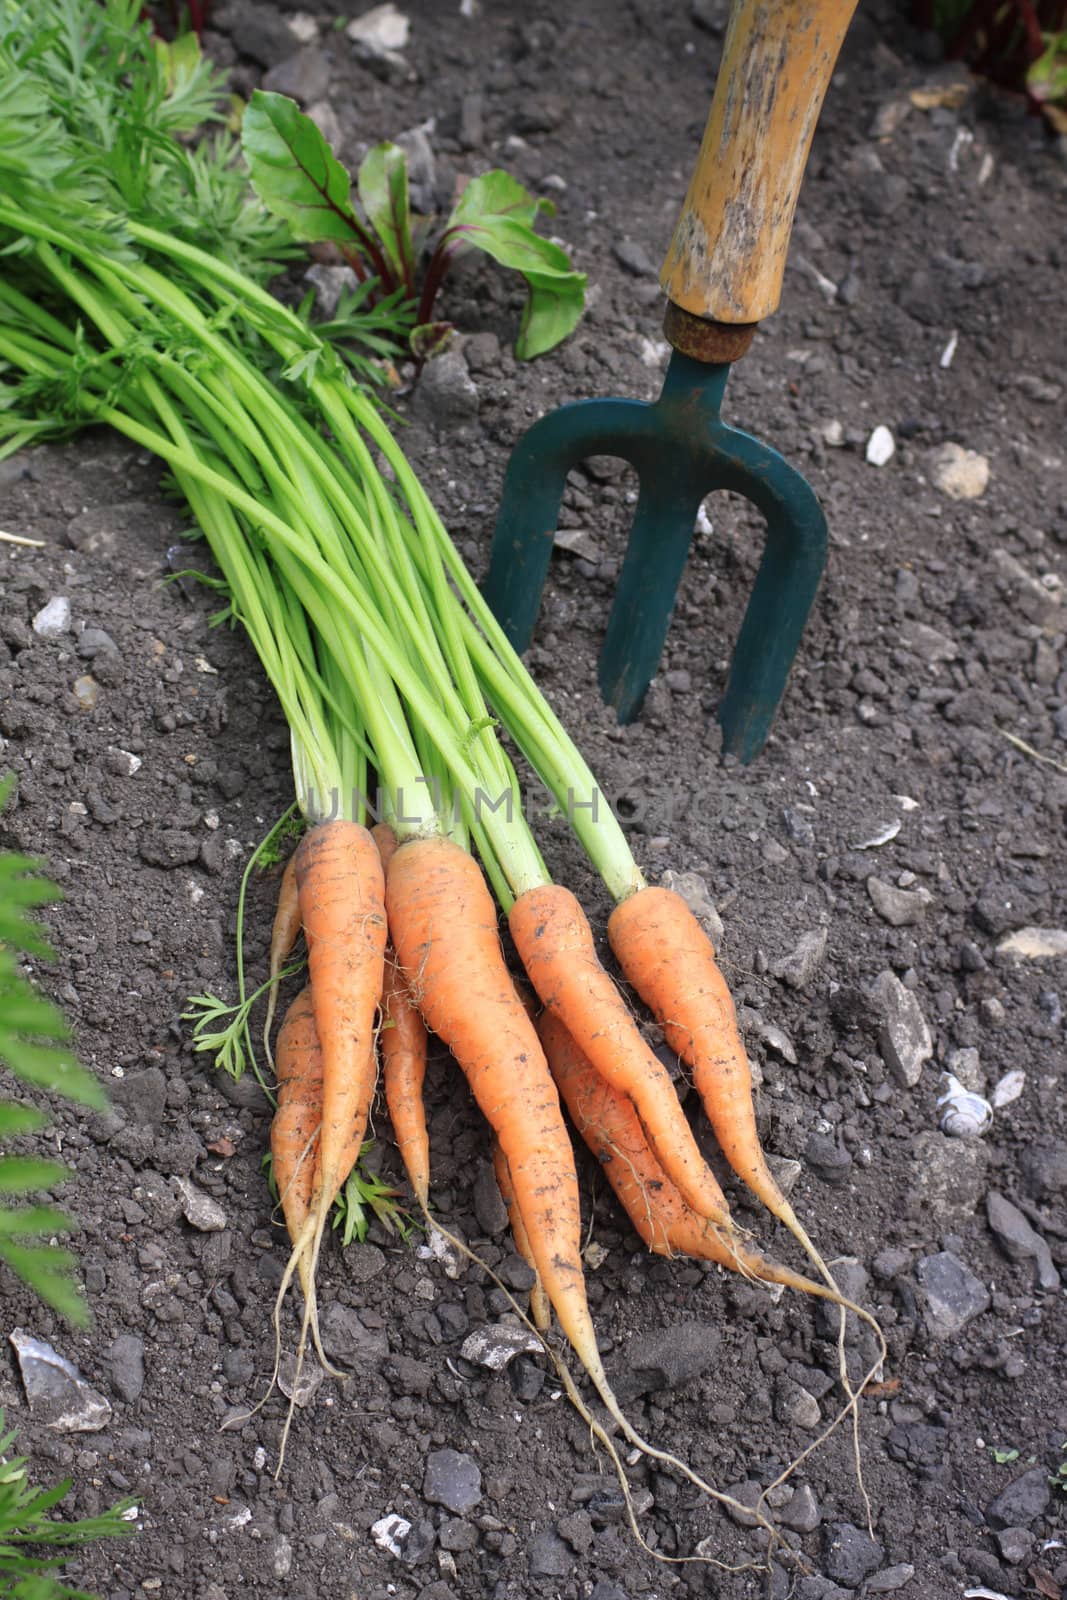 A bunch of freshly picked organically grown carrots lying on top of the soil next to a small garden fork.